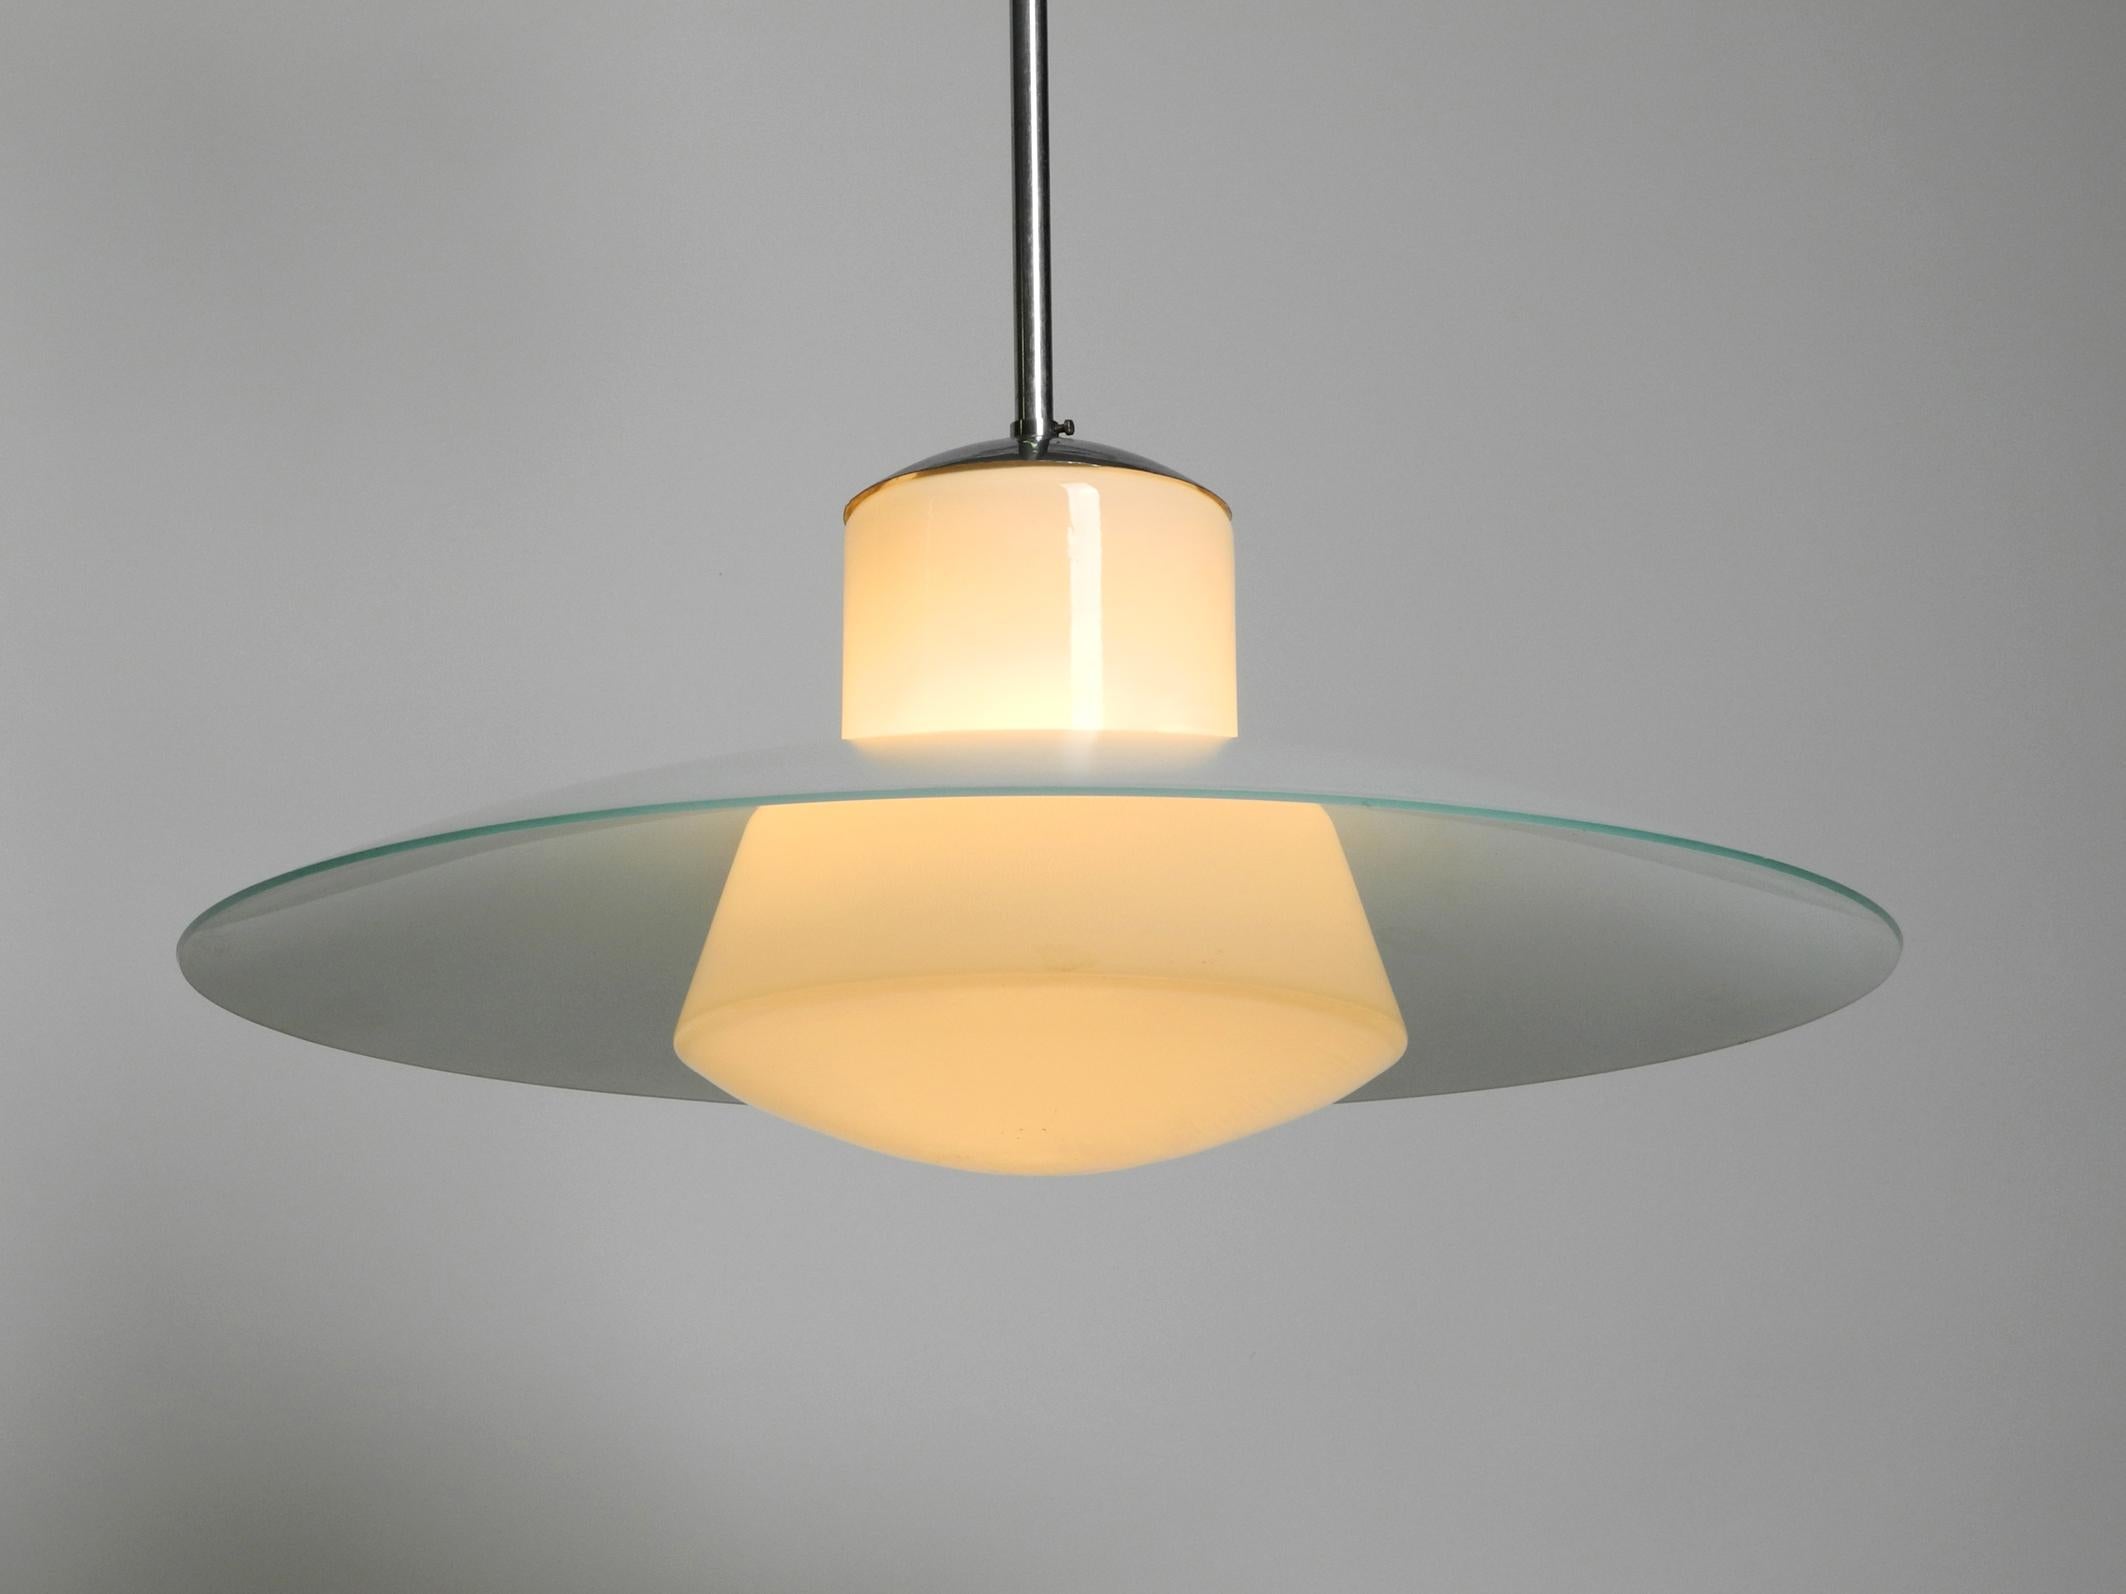 Wonderful original Mid Century Modernist XL glass pendant lamp by Wilhelm Braun Feldweg for Doria. Very rare in this huge double glass version.
Elegant minimalist design with an opaline glass shade and a huge, 
slightly blue glass reflector for